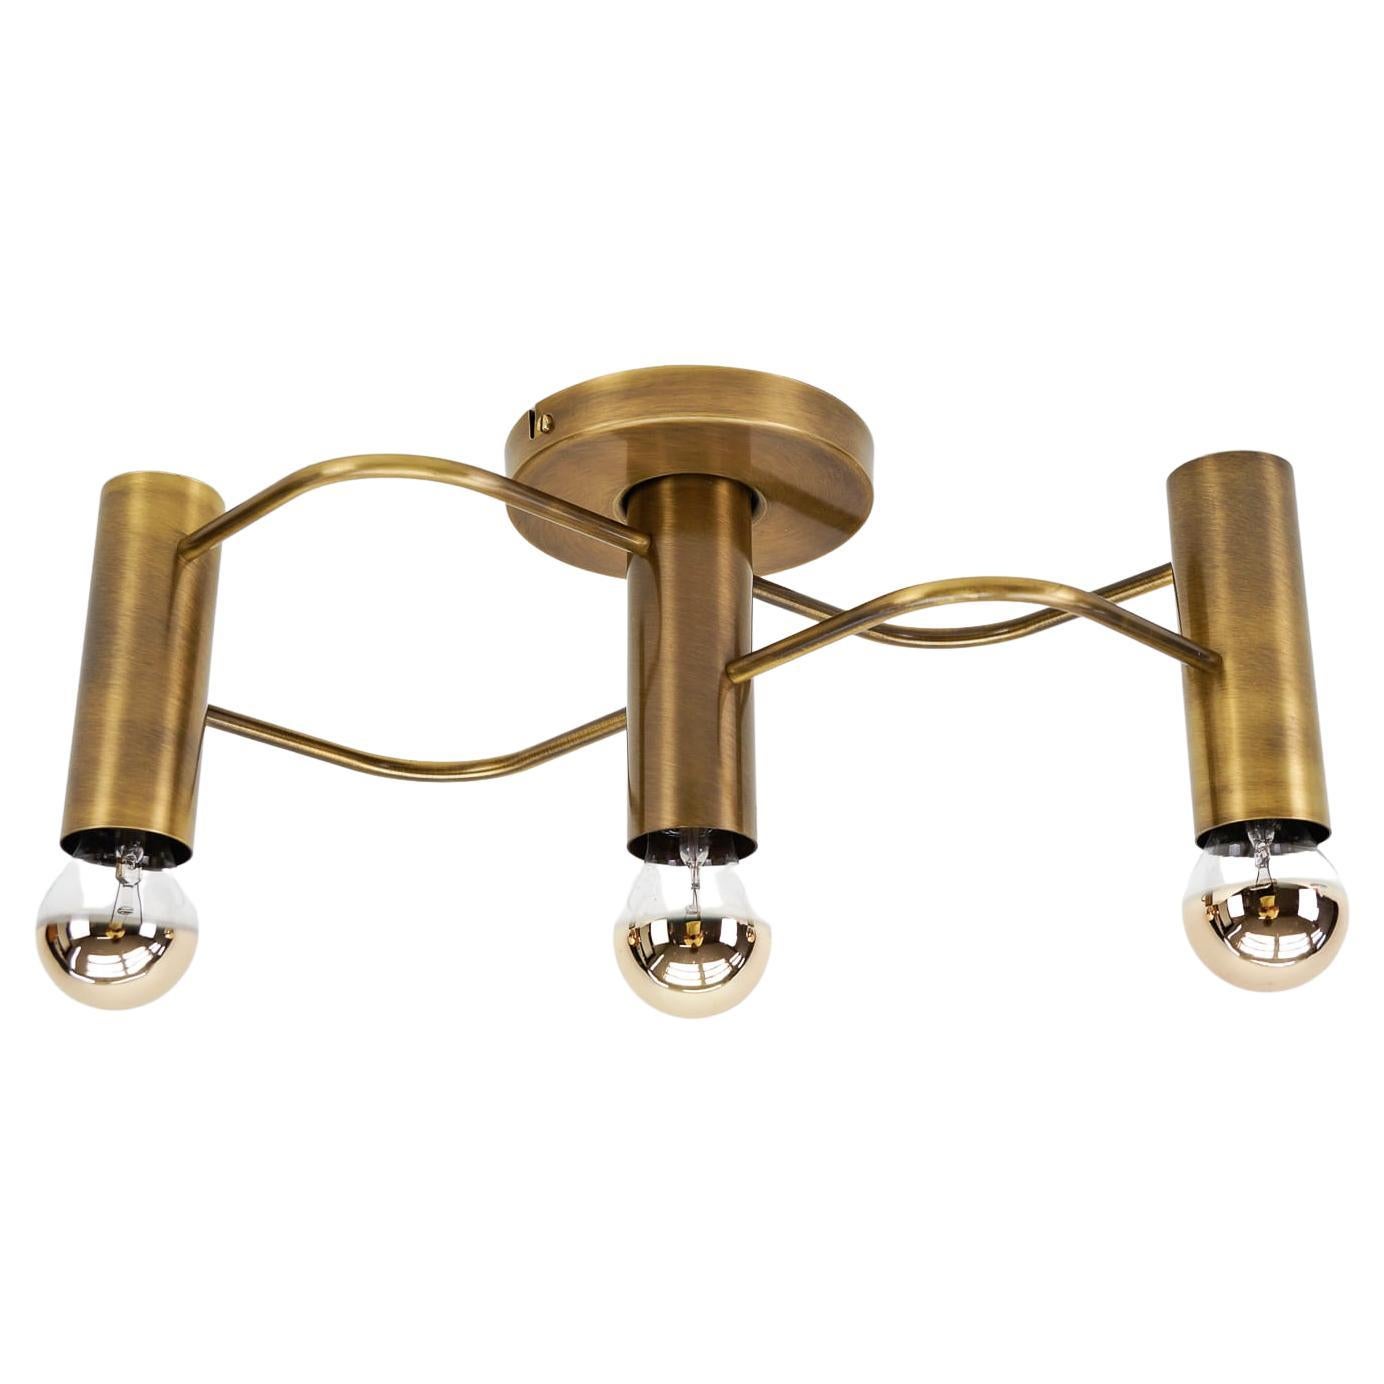 Set of Sculptural Ceiling and Wall Light Flush Mount Chandelier by Leola, 1960s For Sale